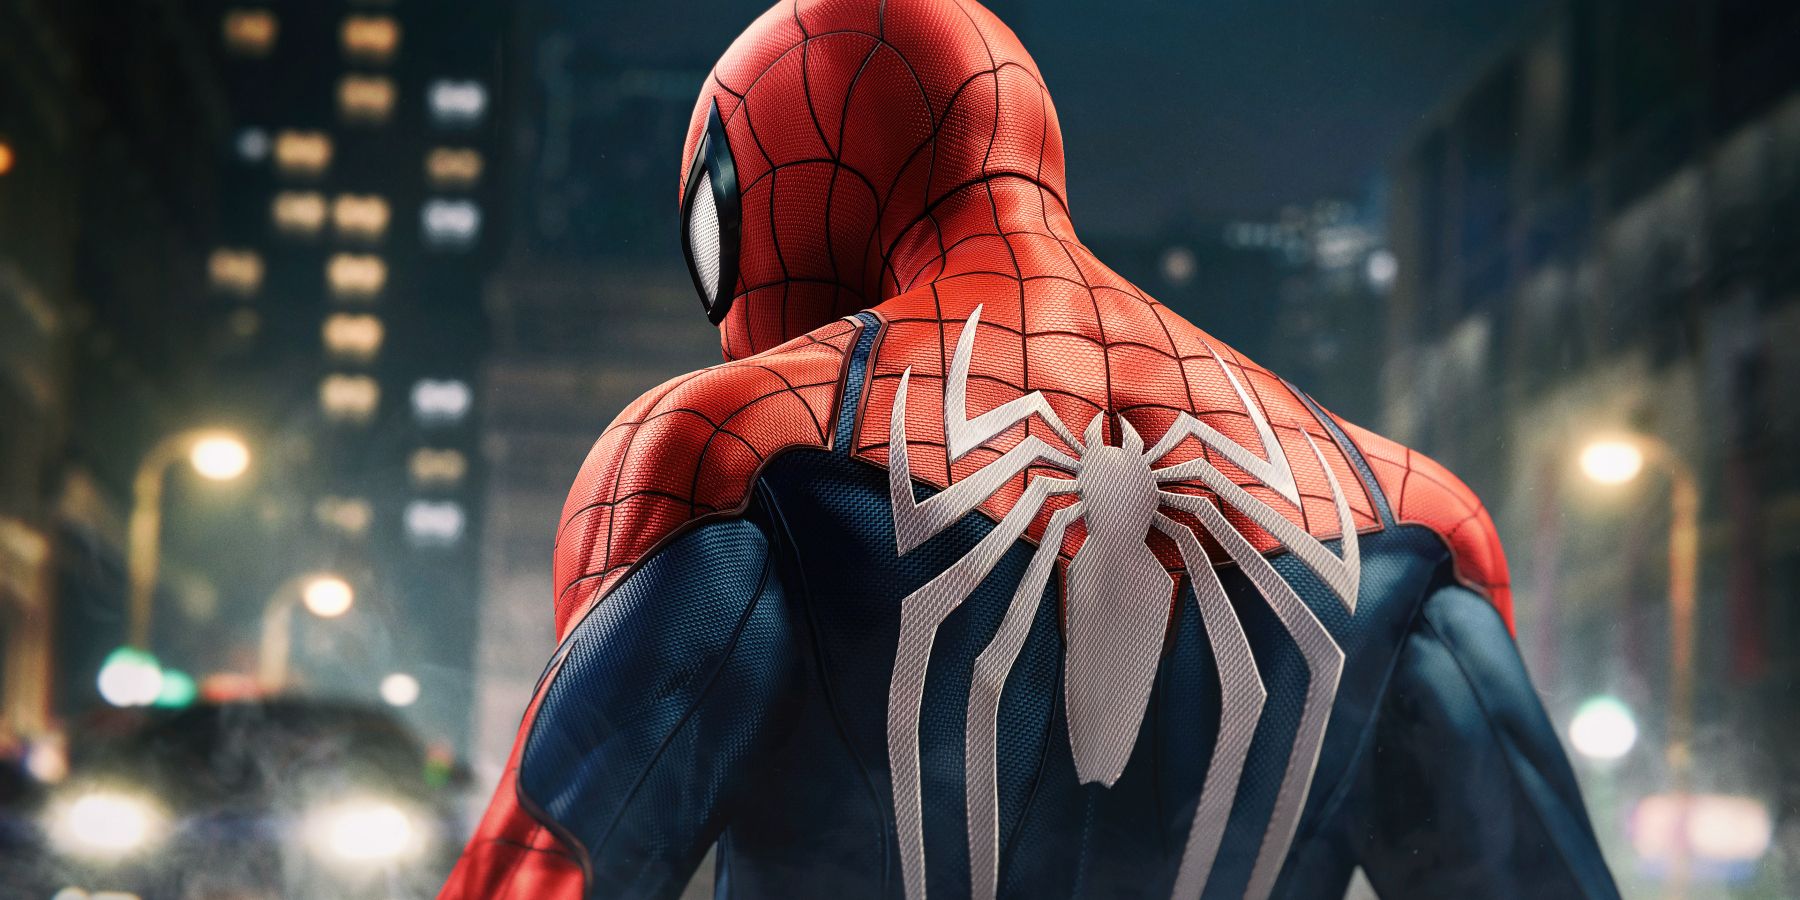 Marvel's spider-man remastered suits the skin cosmetics mods potential